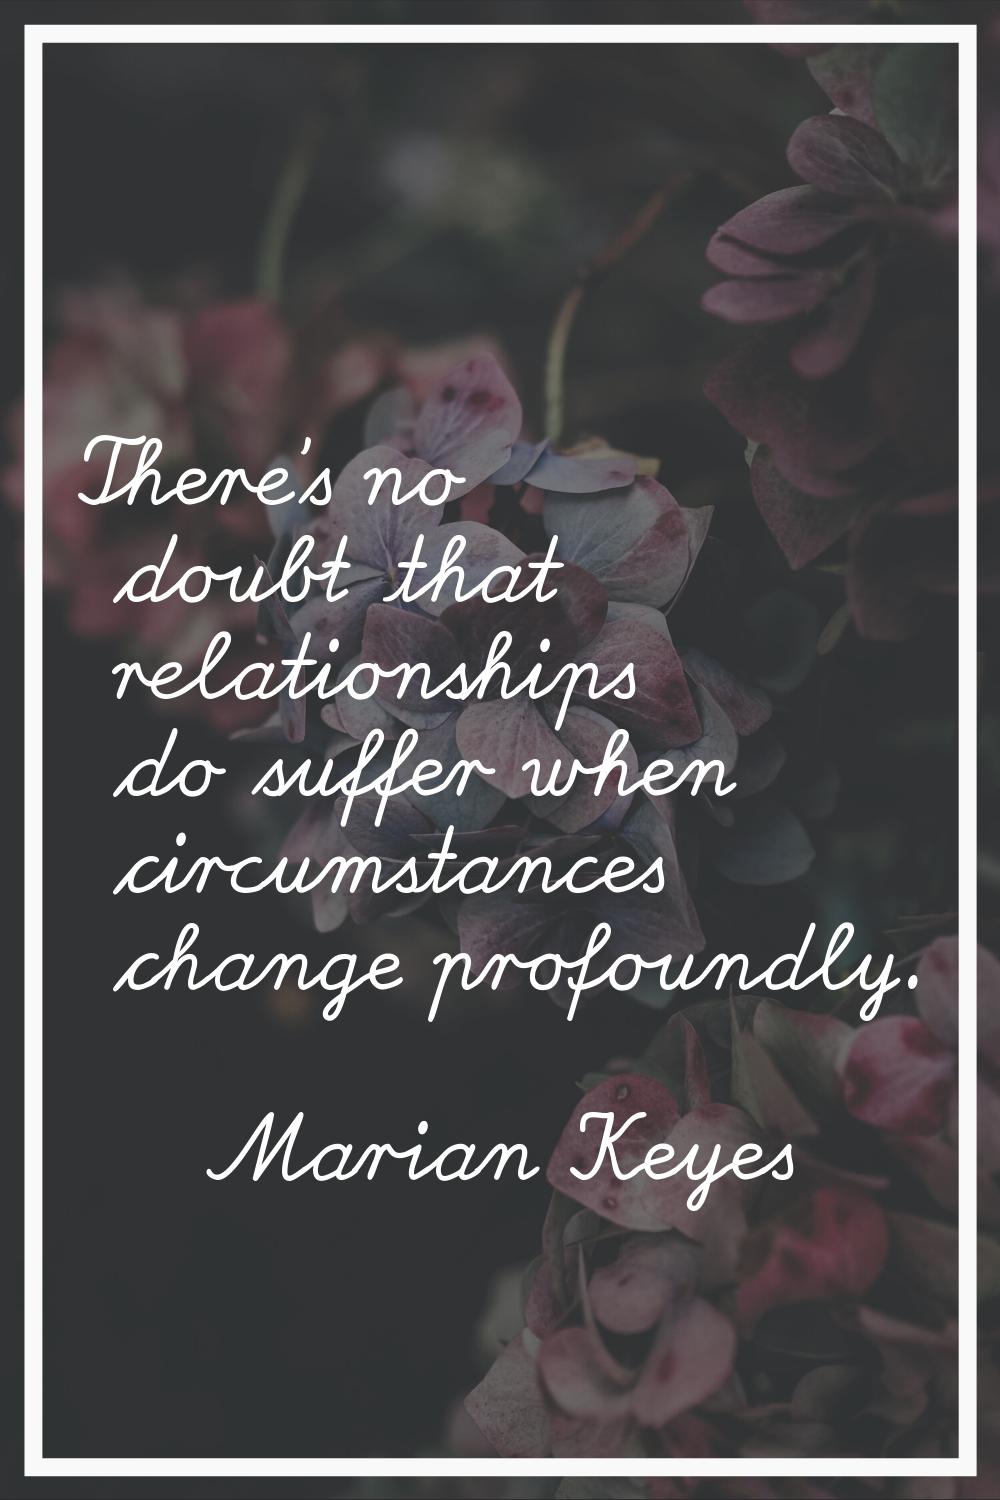 There's no doubt that relationships do suffer when circumstances change profoundly.